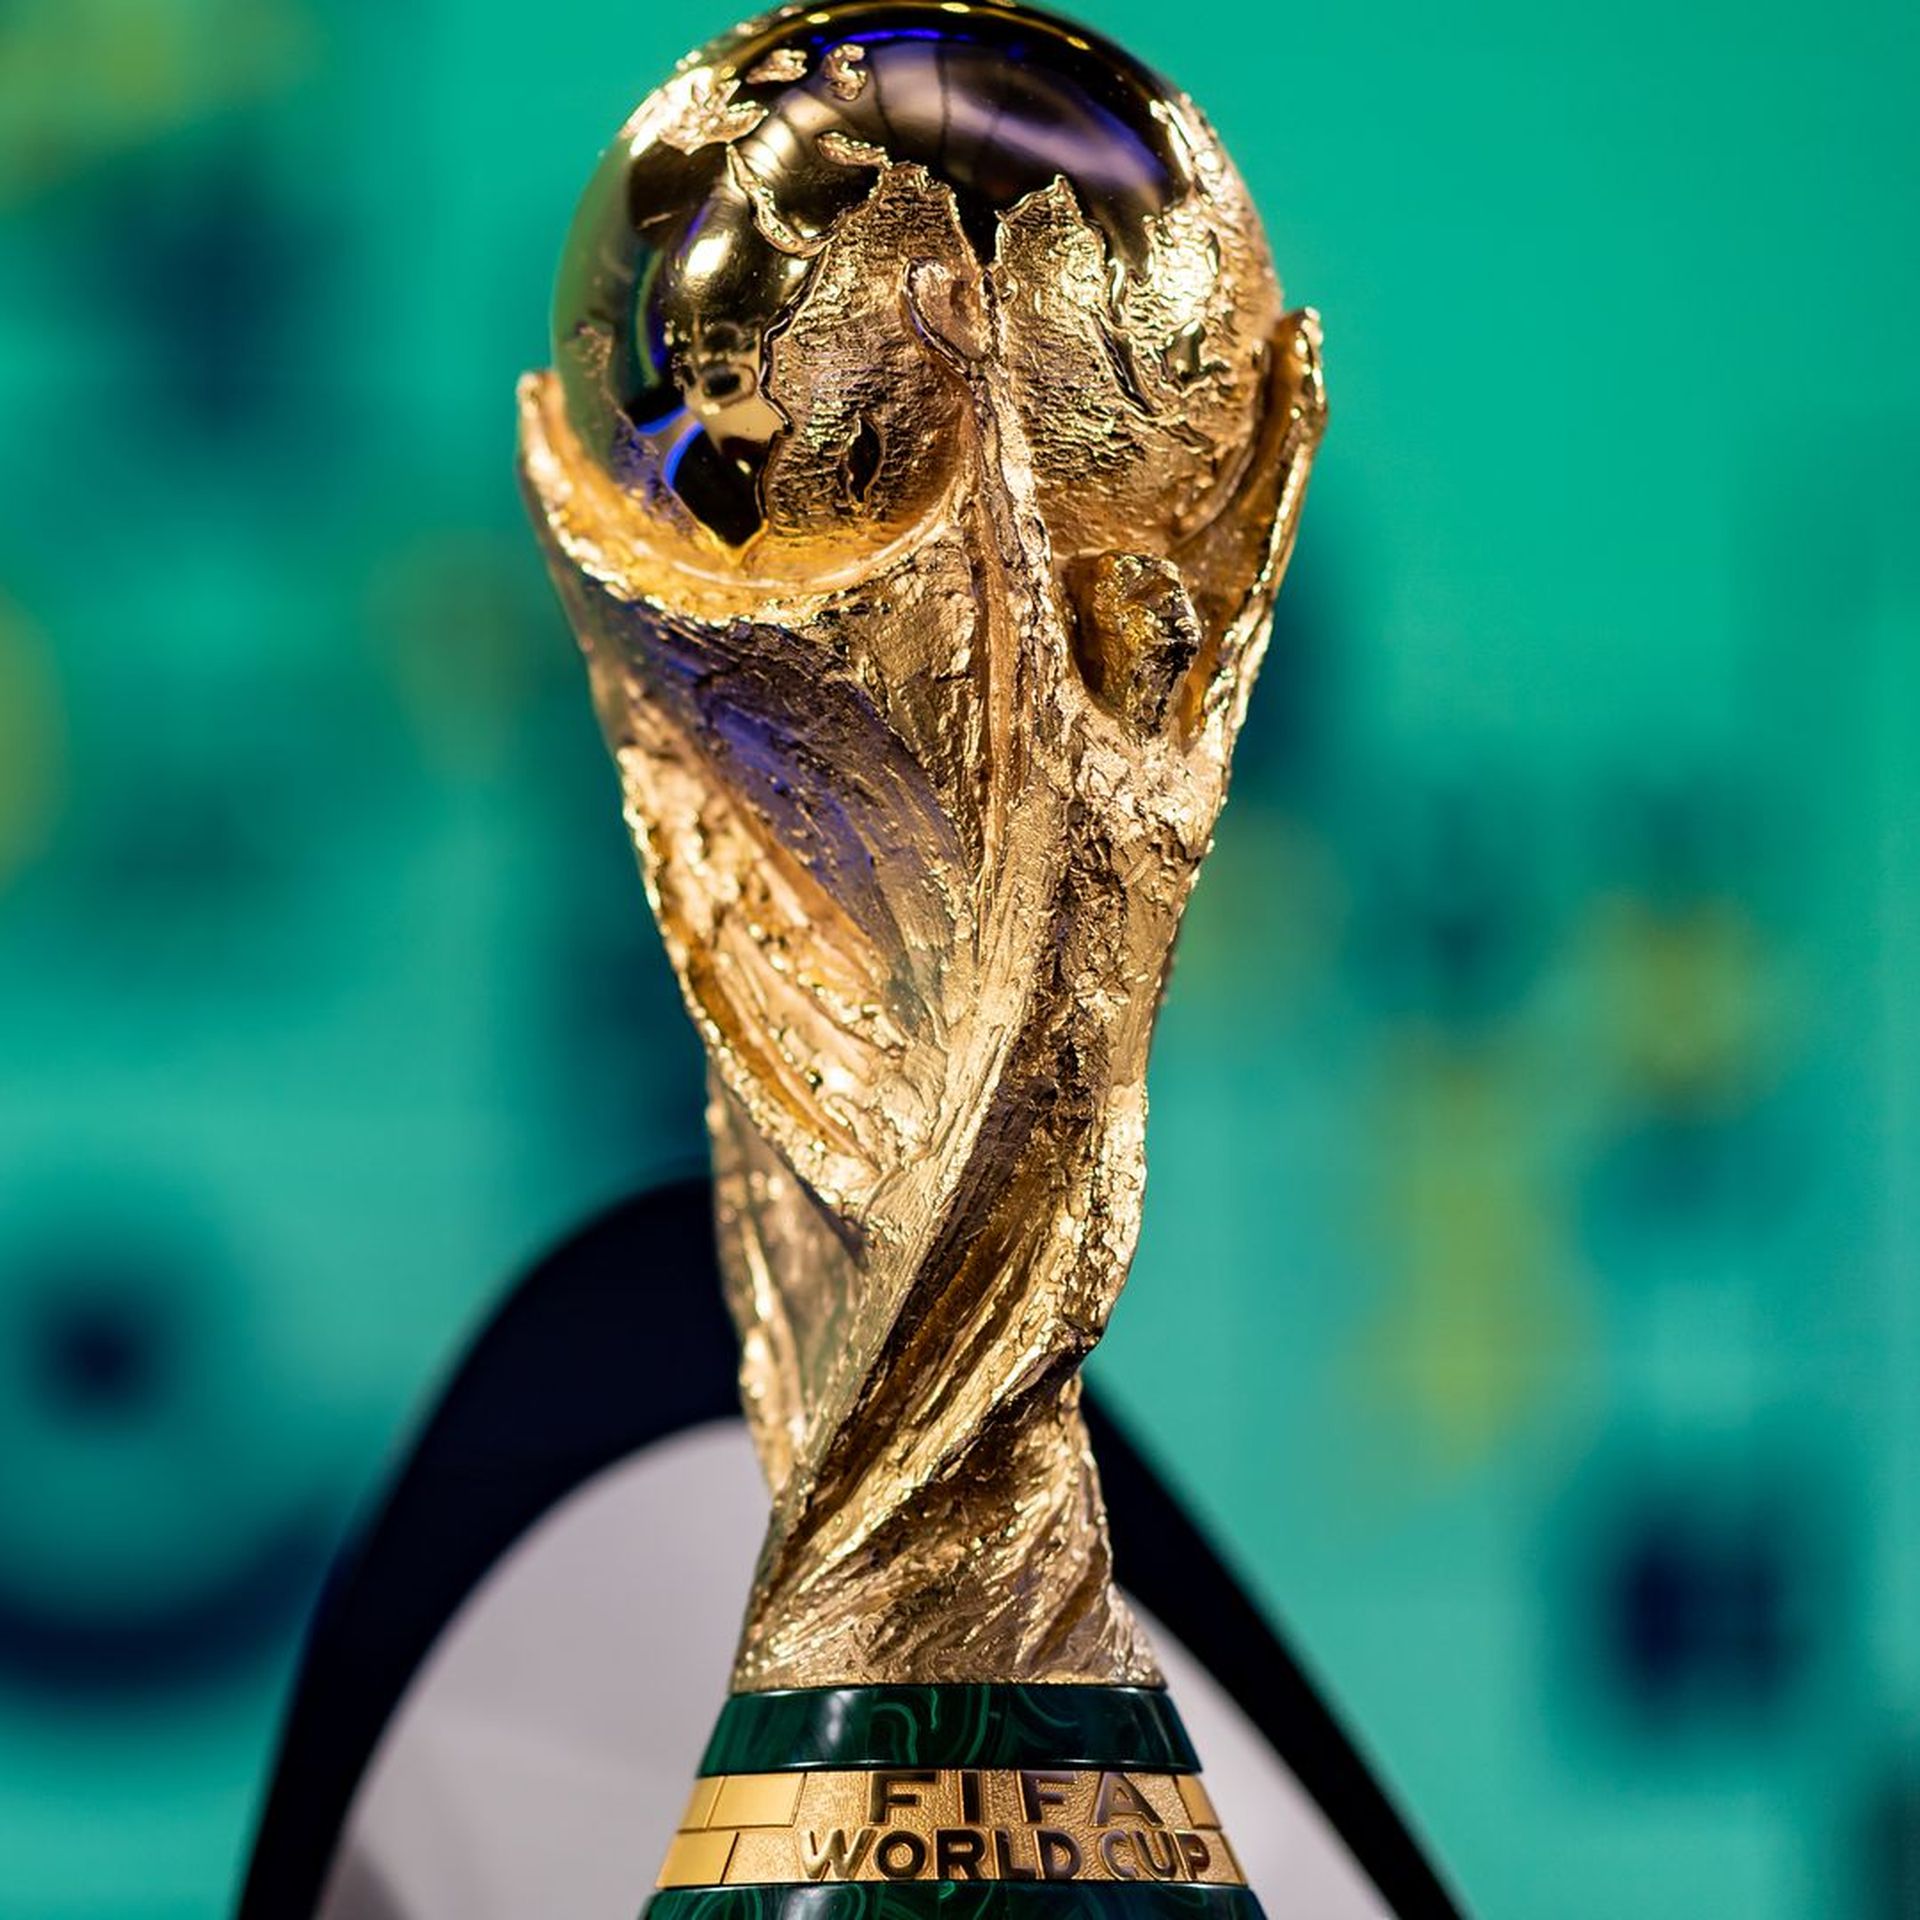 The gold FIFA World Cup trophy with green background behind it. 